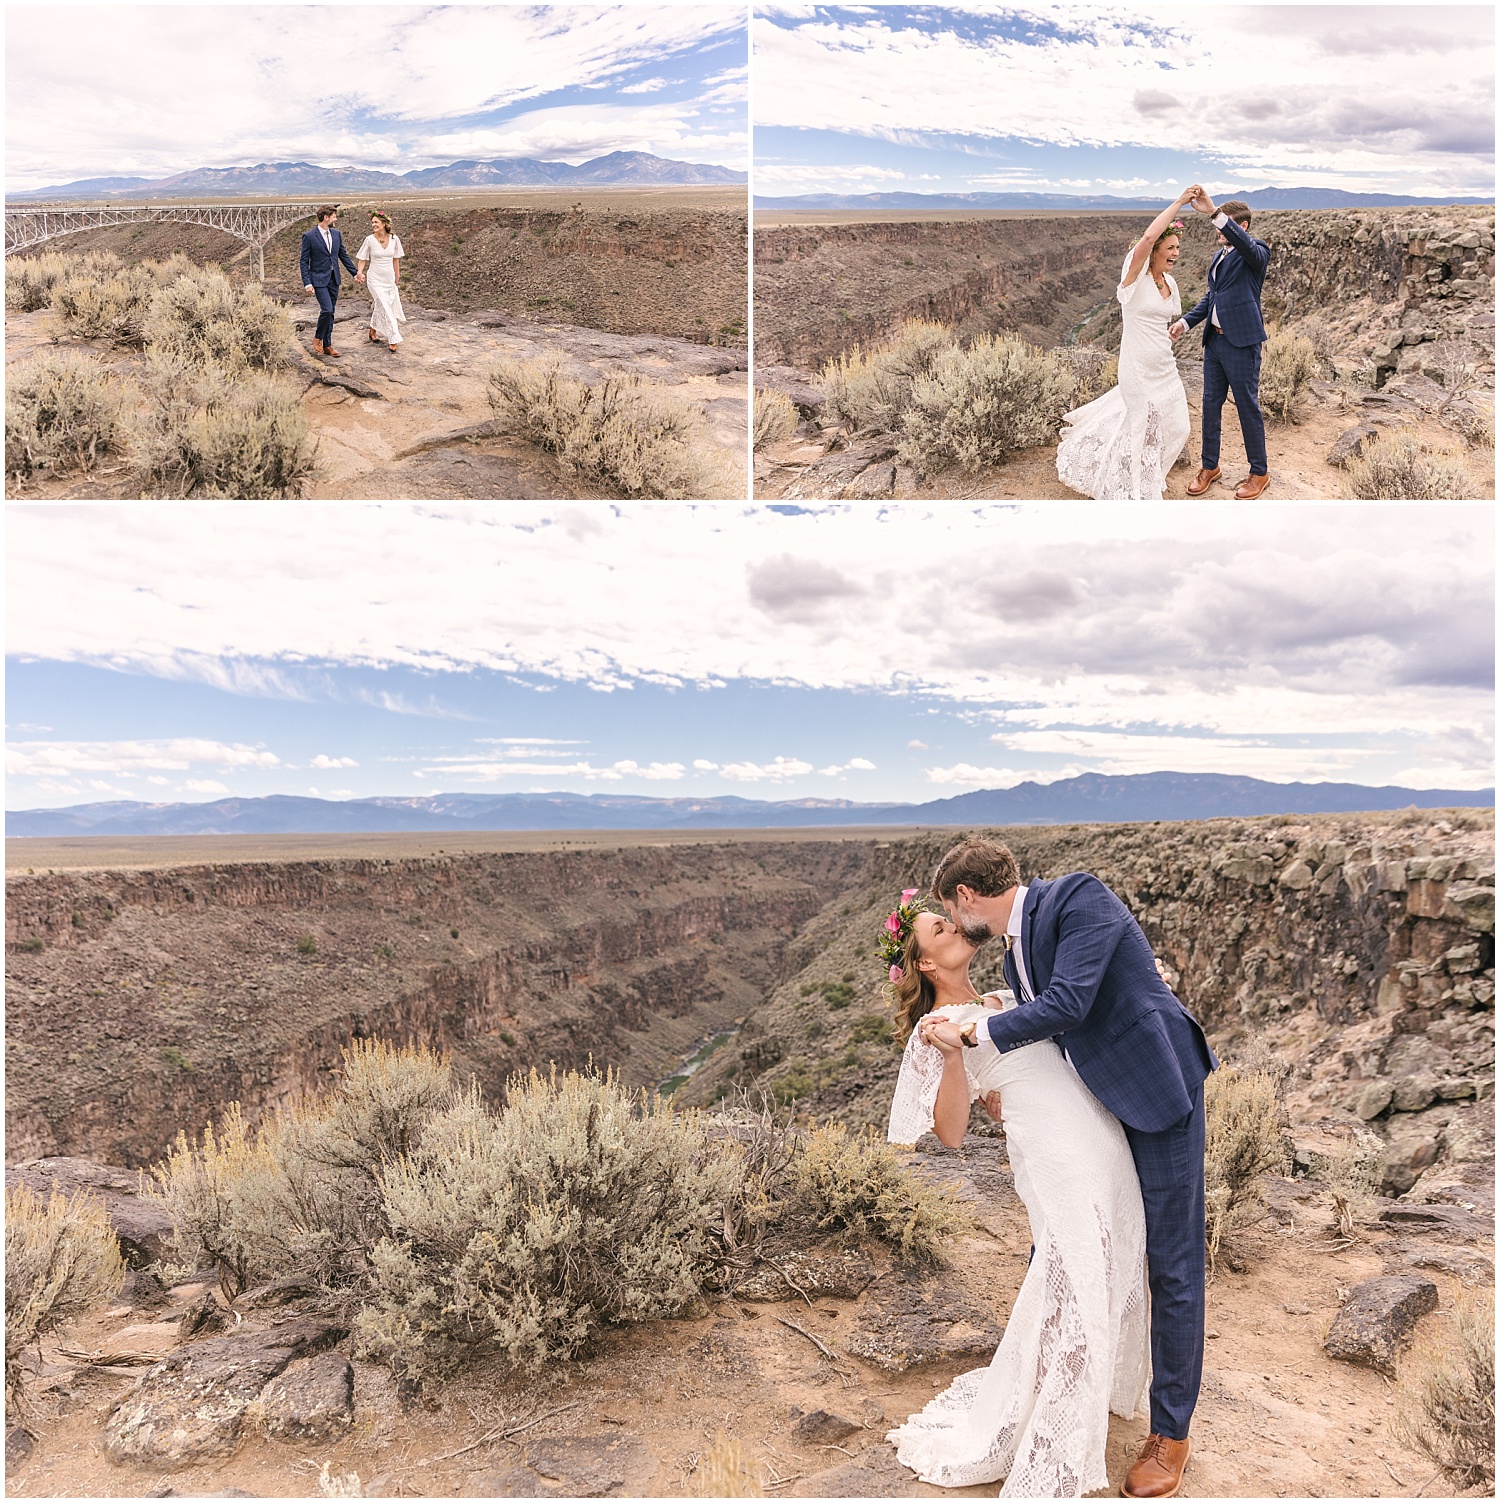 Bride and groom dancing at the edge of the Rio Grande Gorge